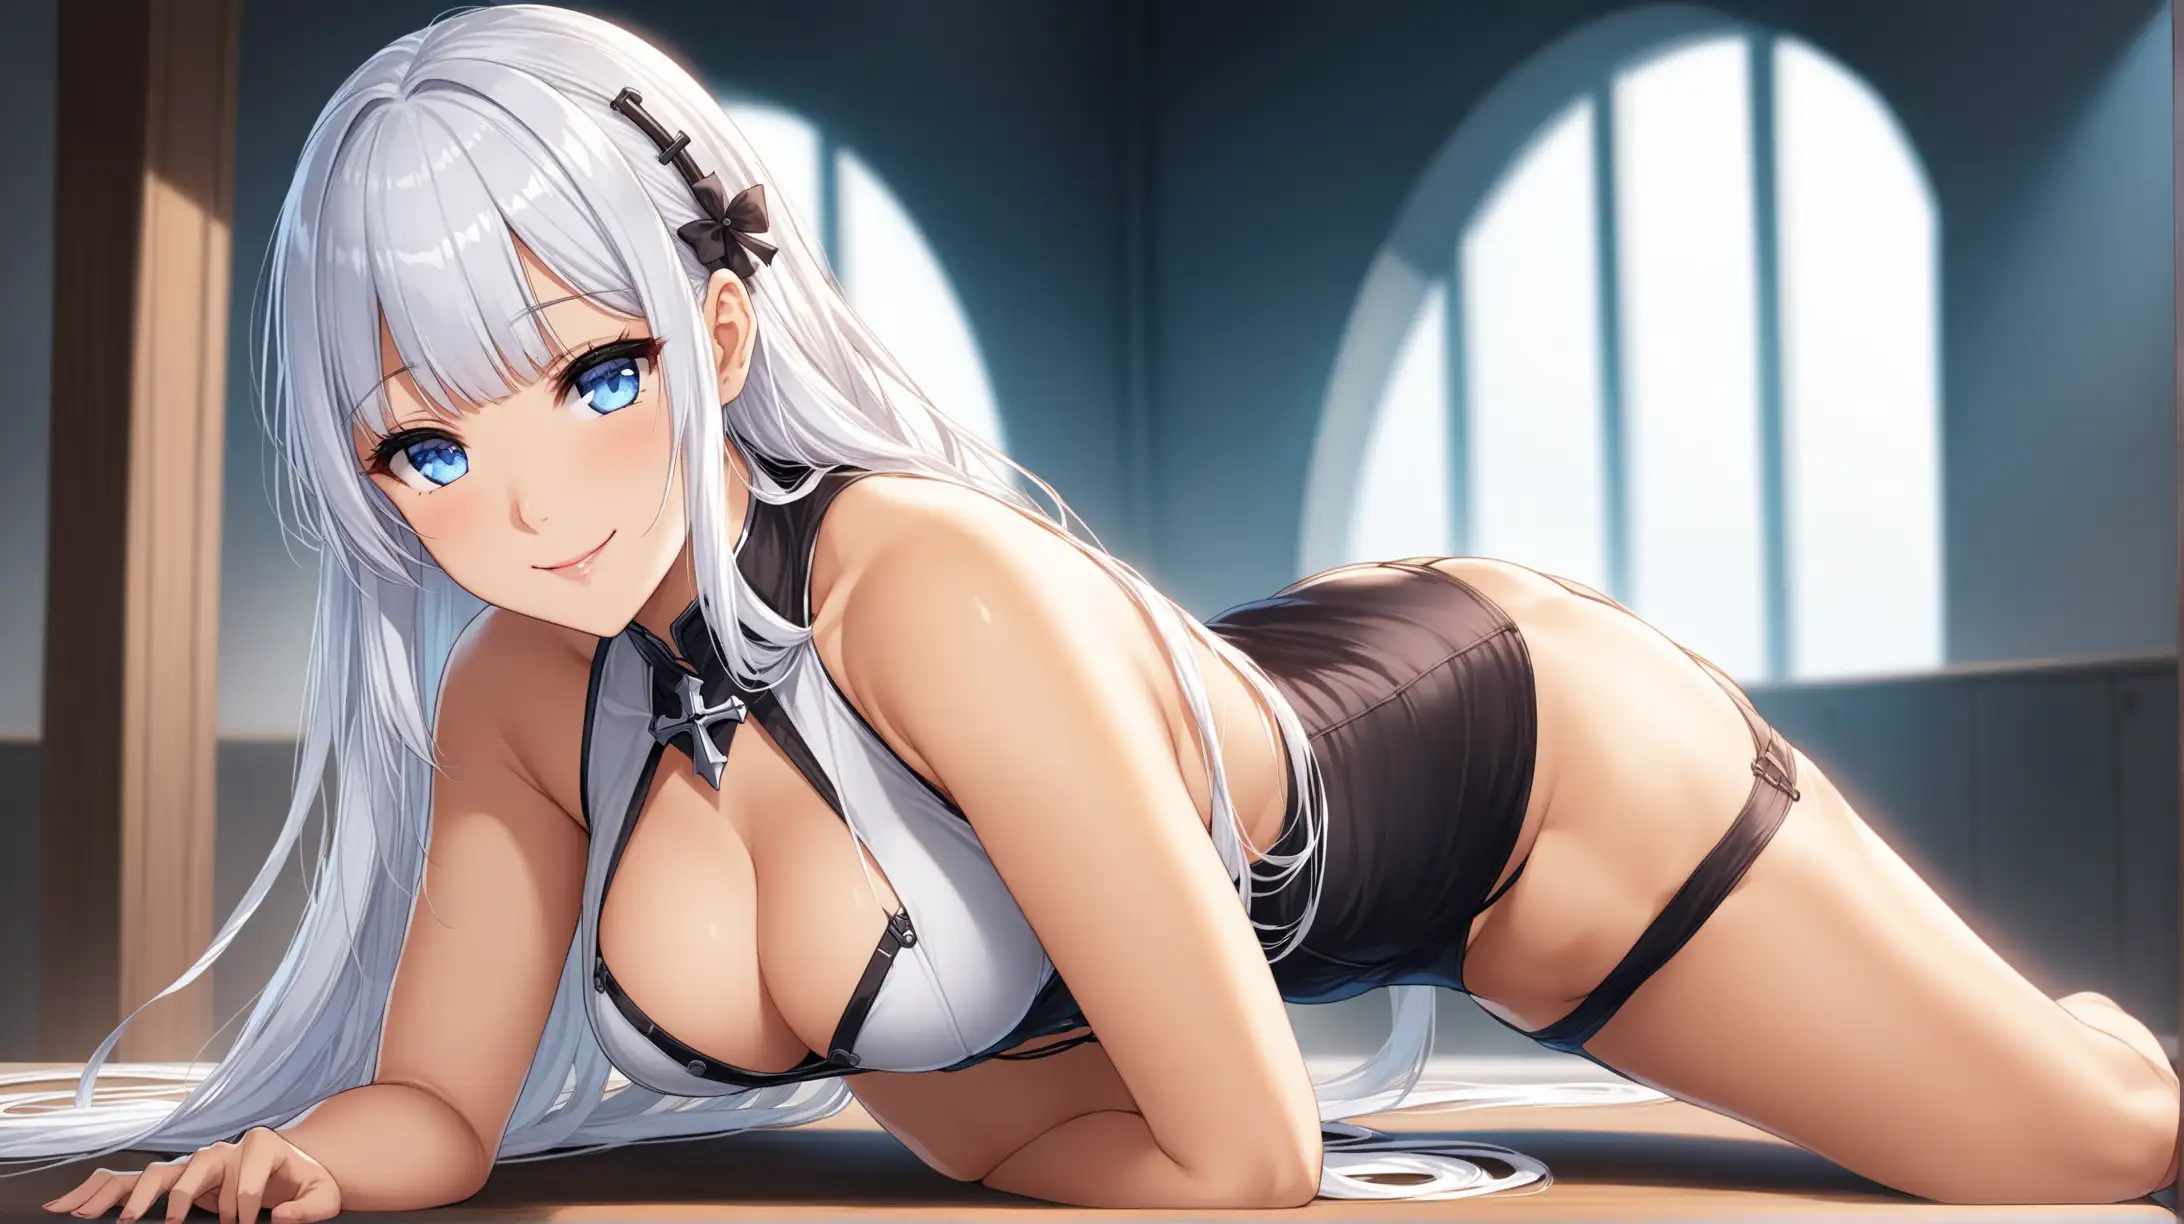 Draw the character Illustrious from Azur Lane, long hair, blue eyes, high quality, indoors, natural lighting, in a seductive pose, leaning forward, wearing an outfit inspired from the Fallout series, smiling at the viewer